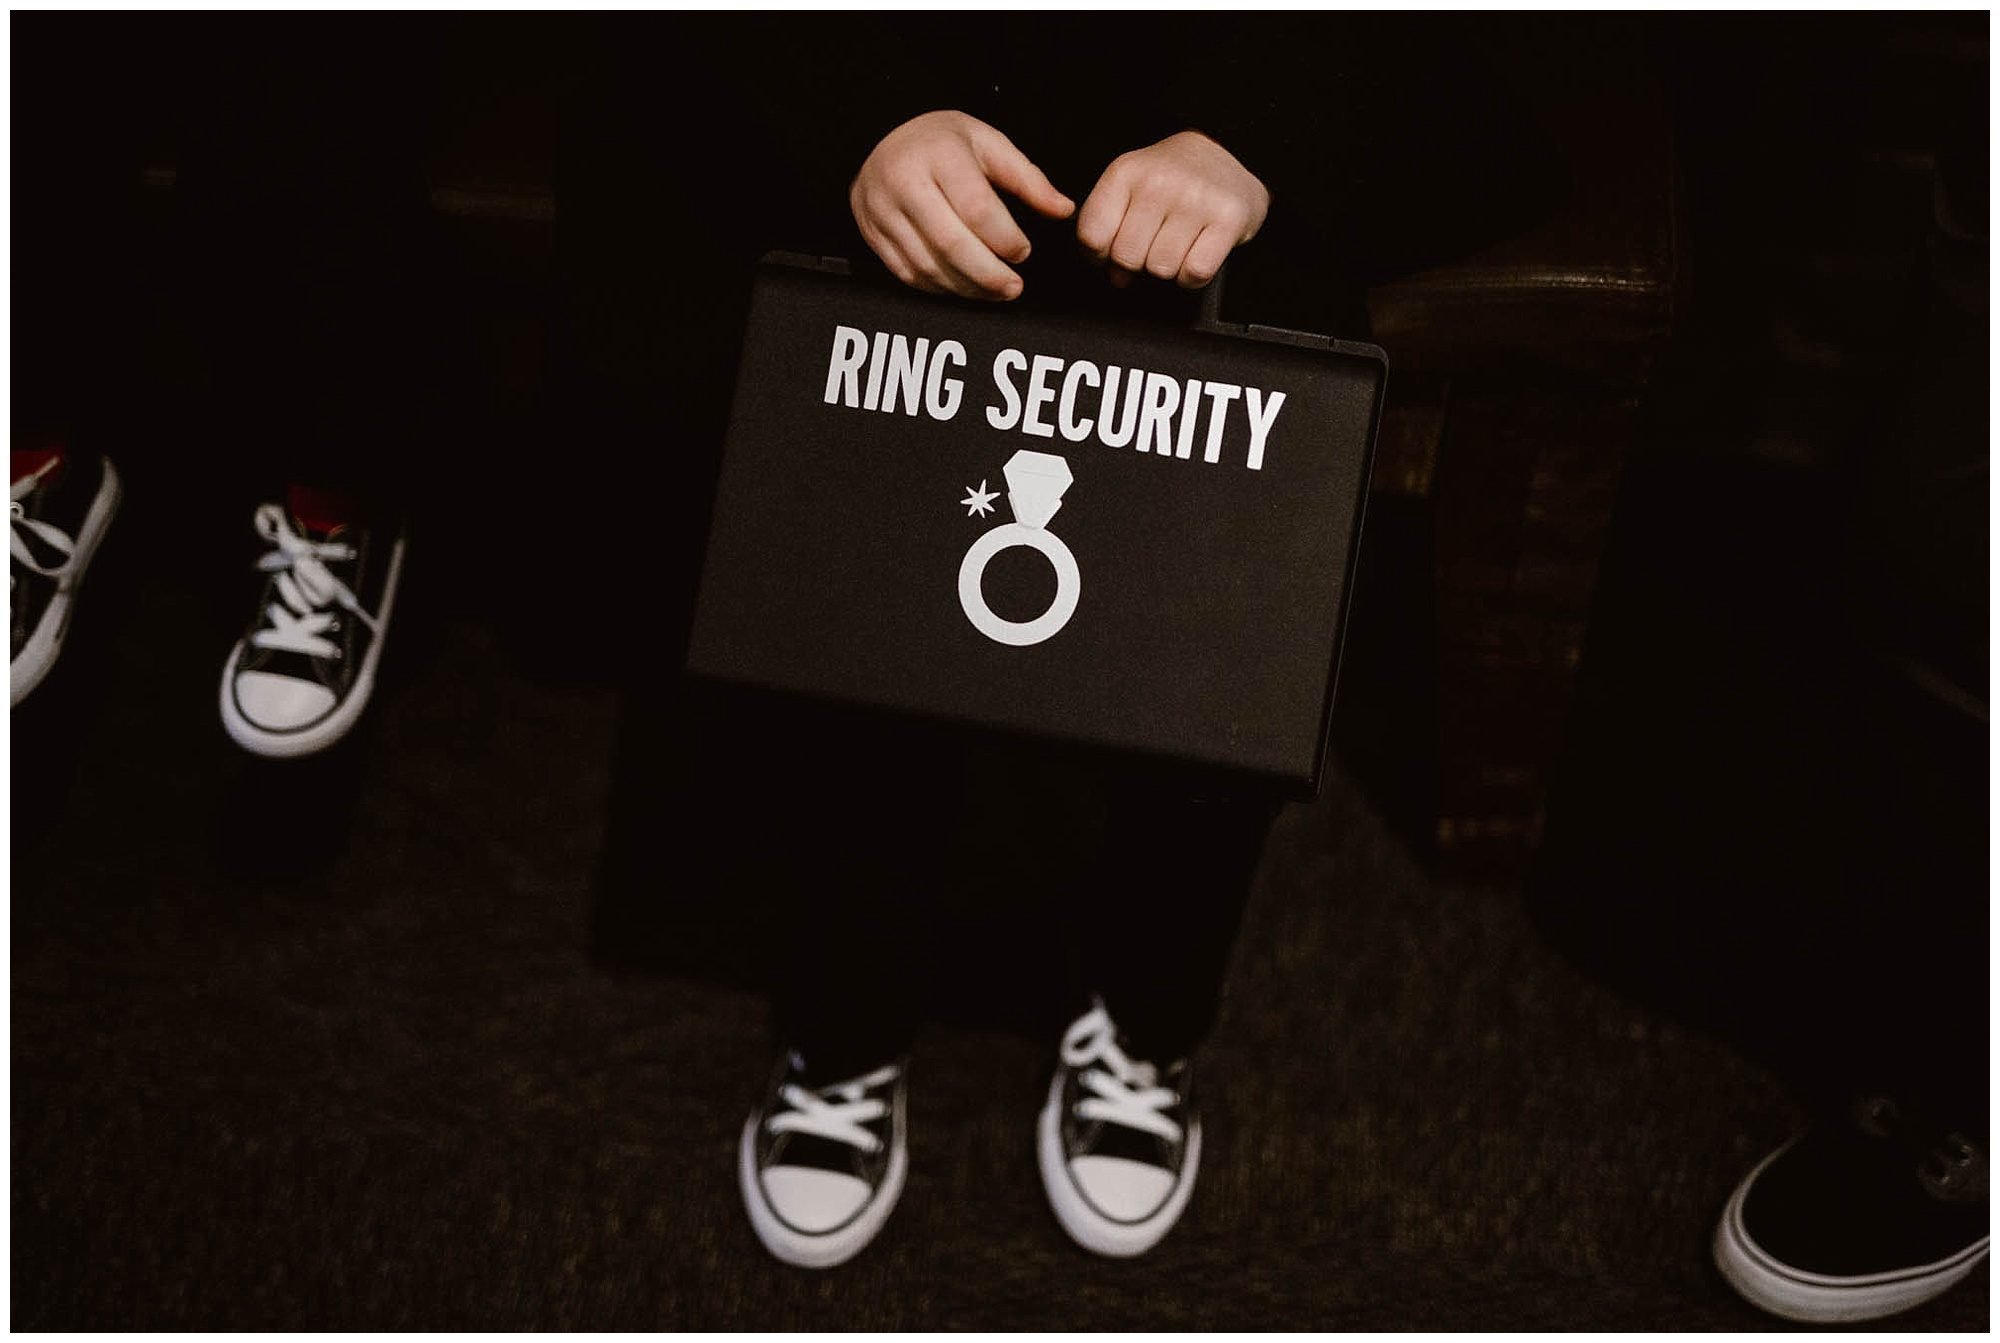 ring bearer holding ring security briefcase